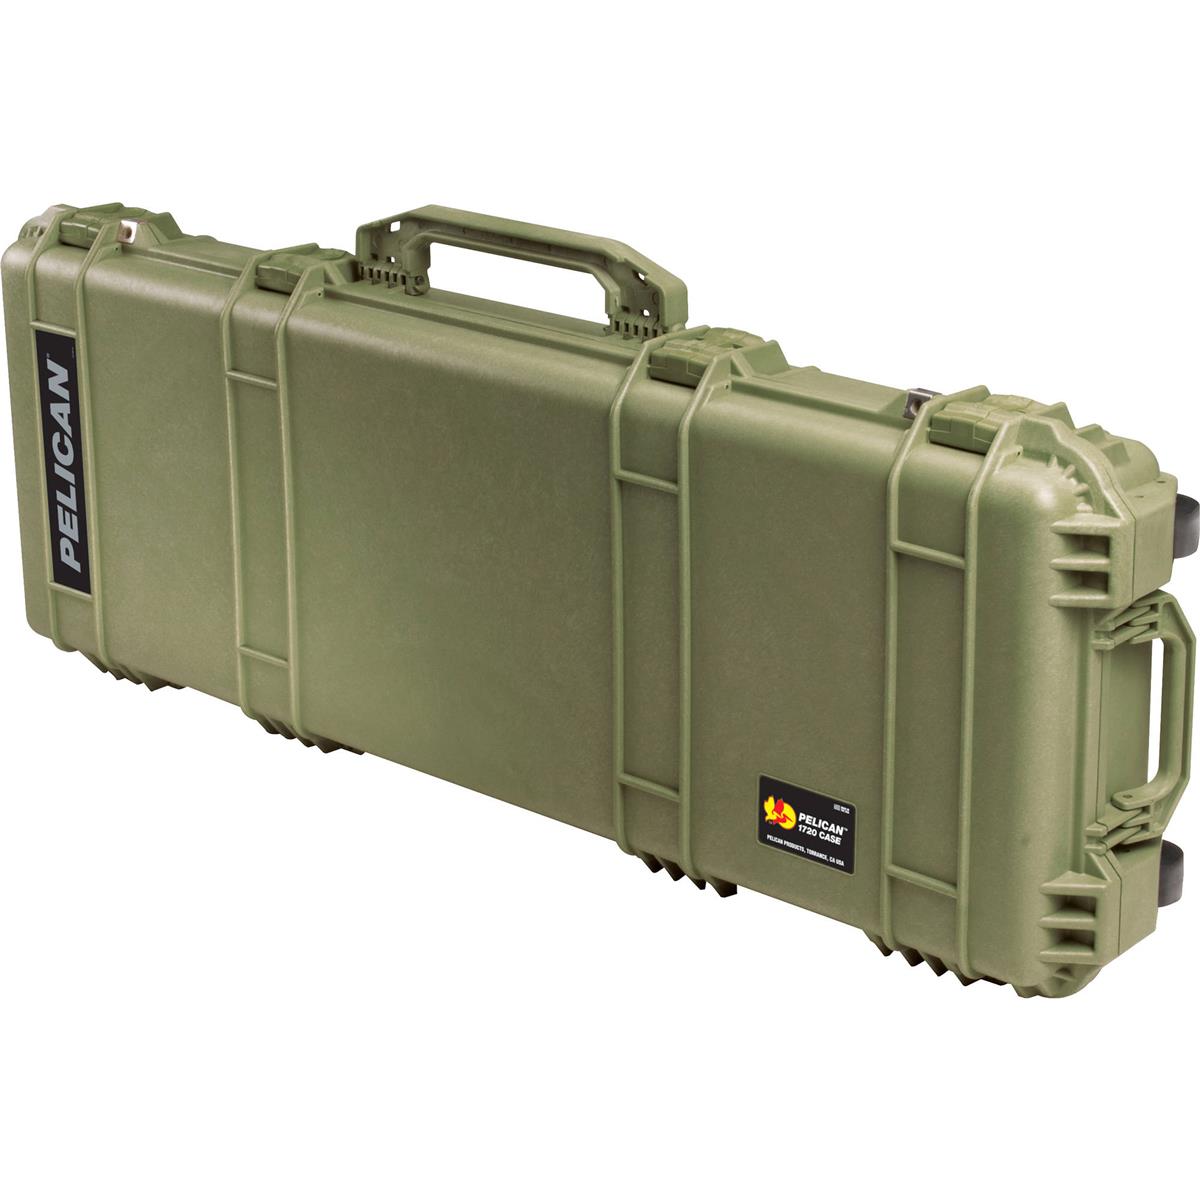 Pelican 1720 Travel Vault Wheeled Weapons Case with Foam Insert, Olive Green -  017200-0000-130